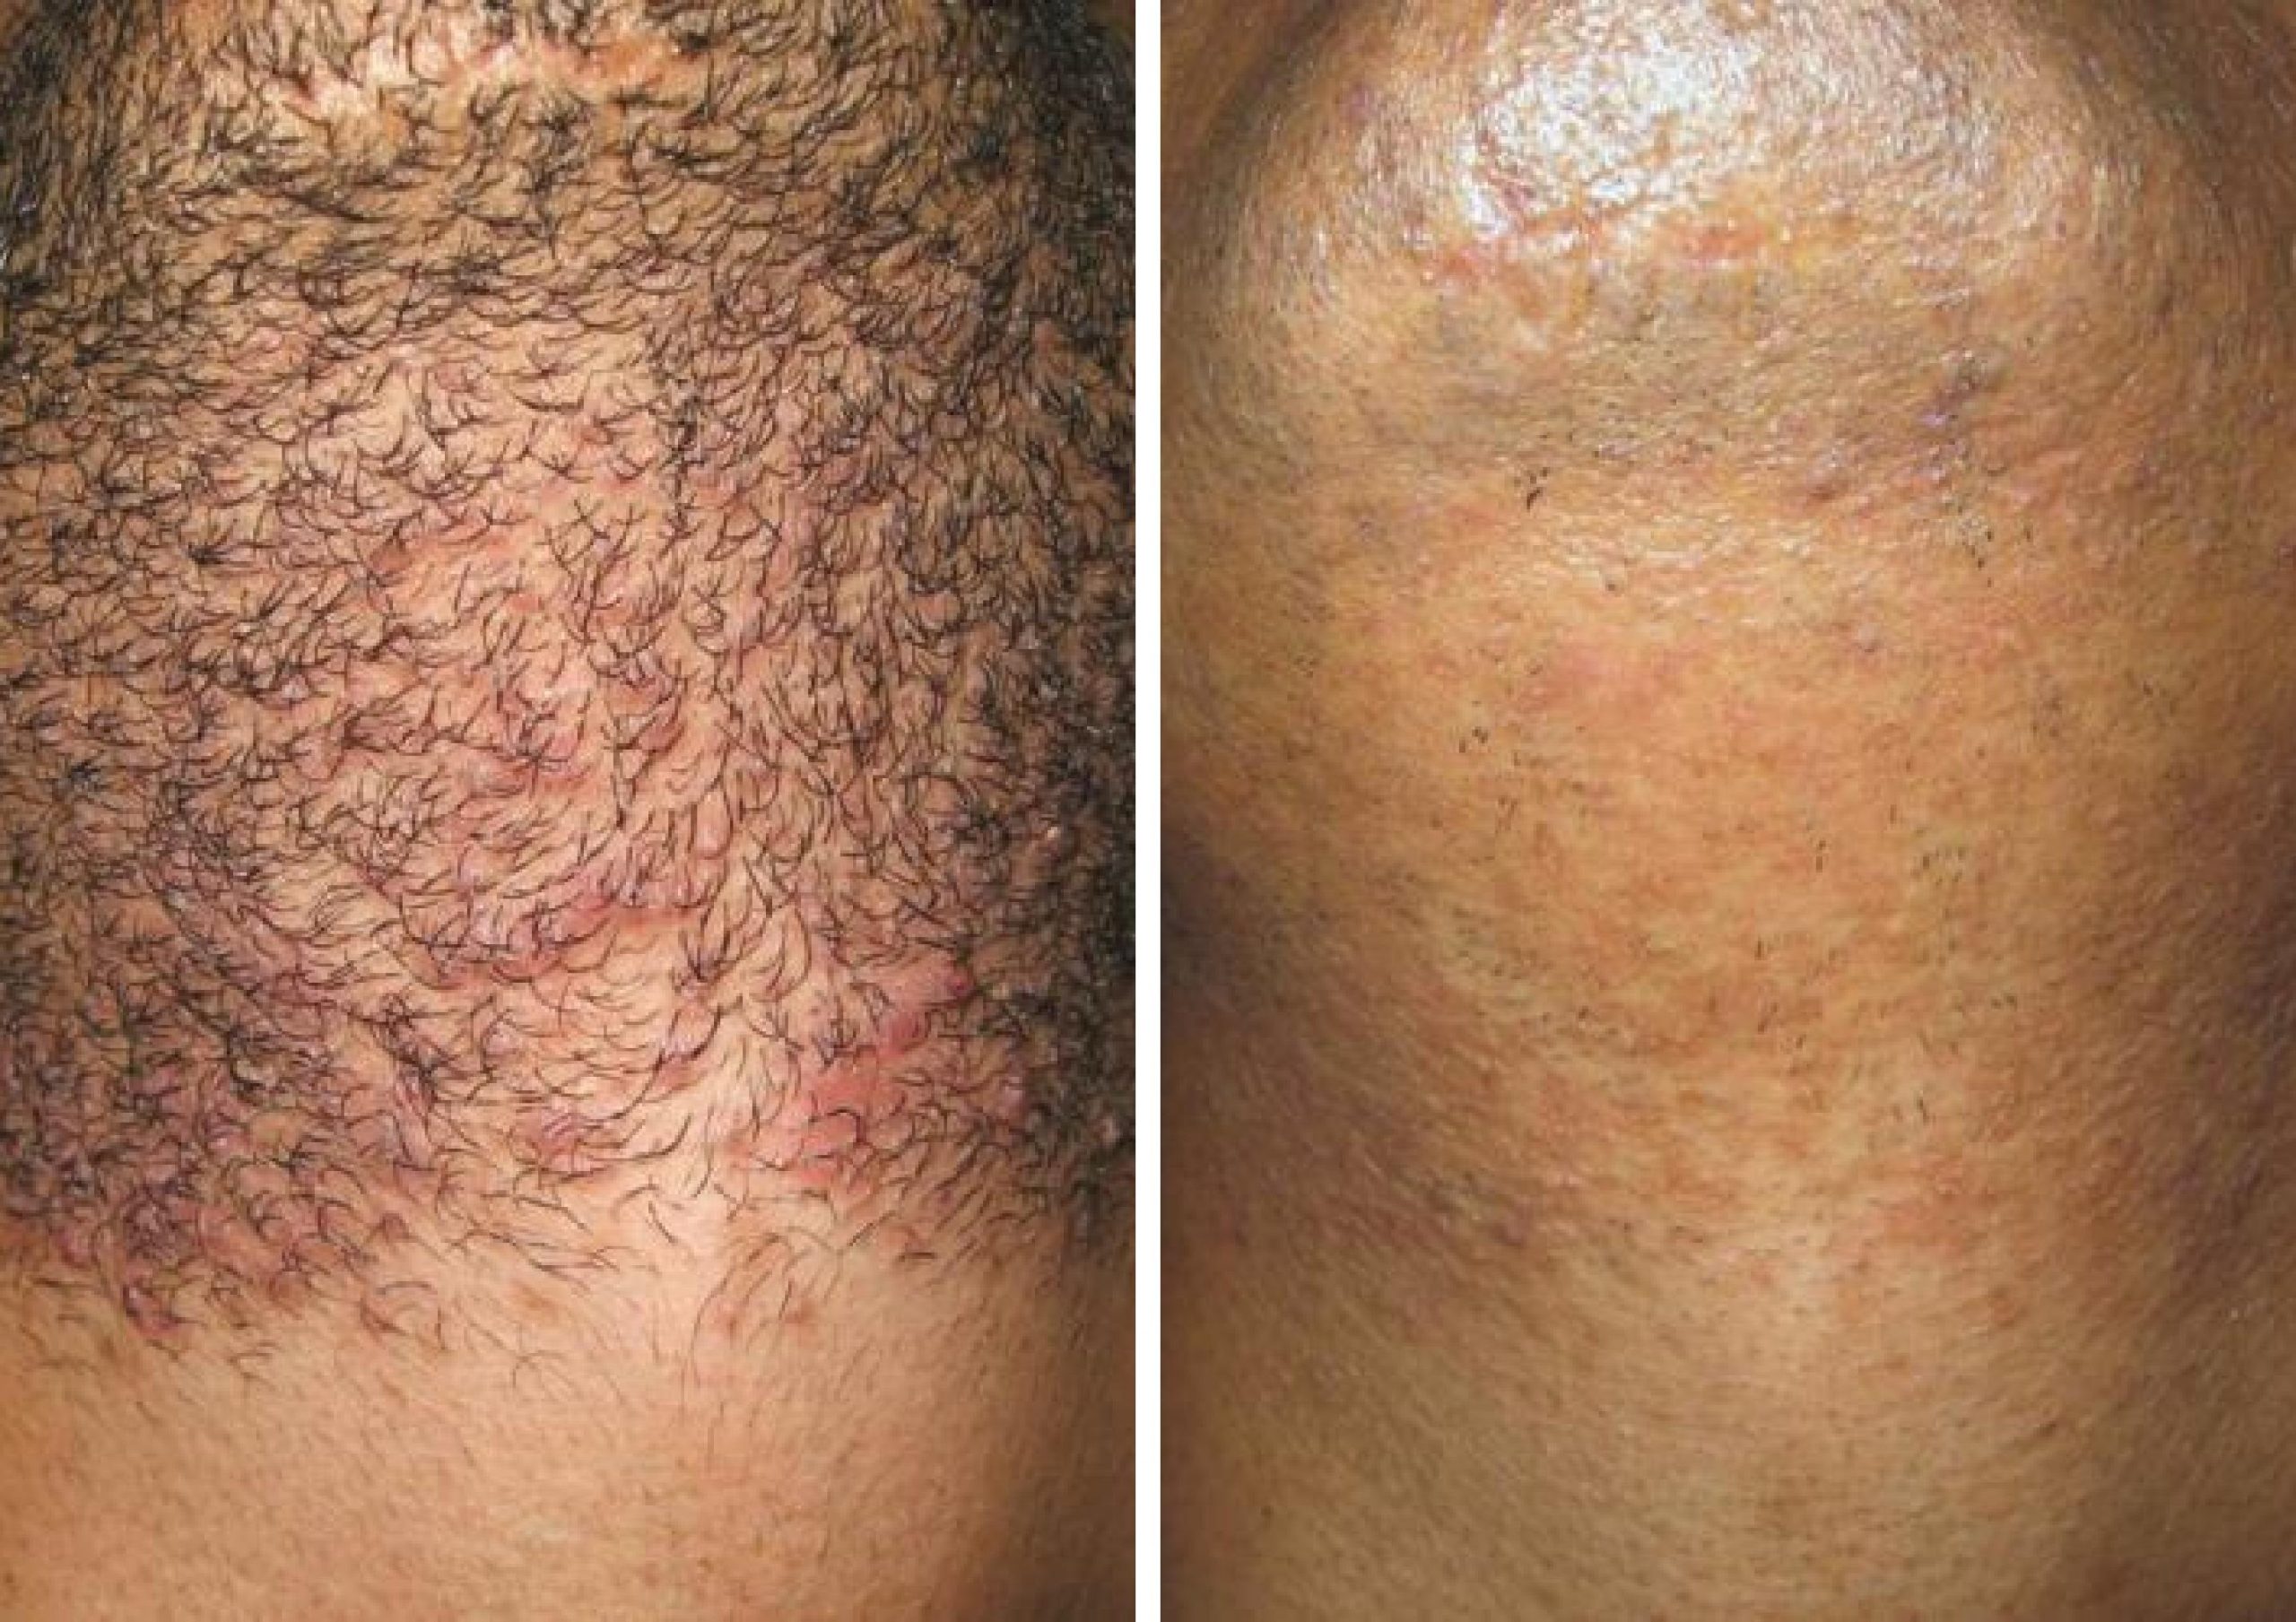 Laser Hair Removal before and after treatment results to chin area.